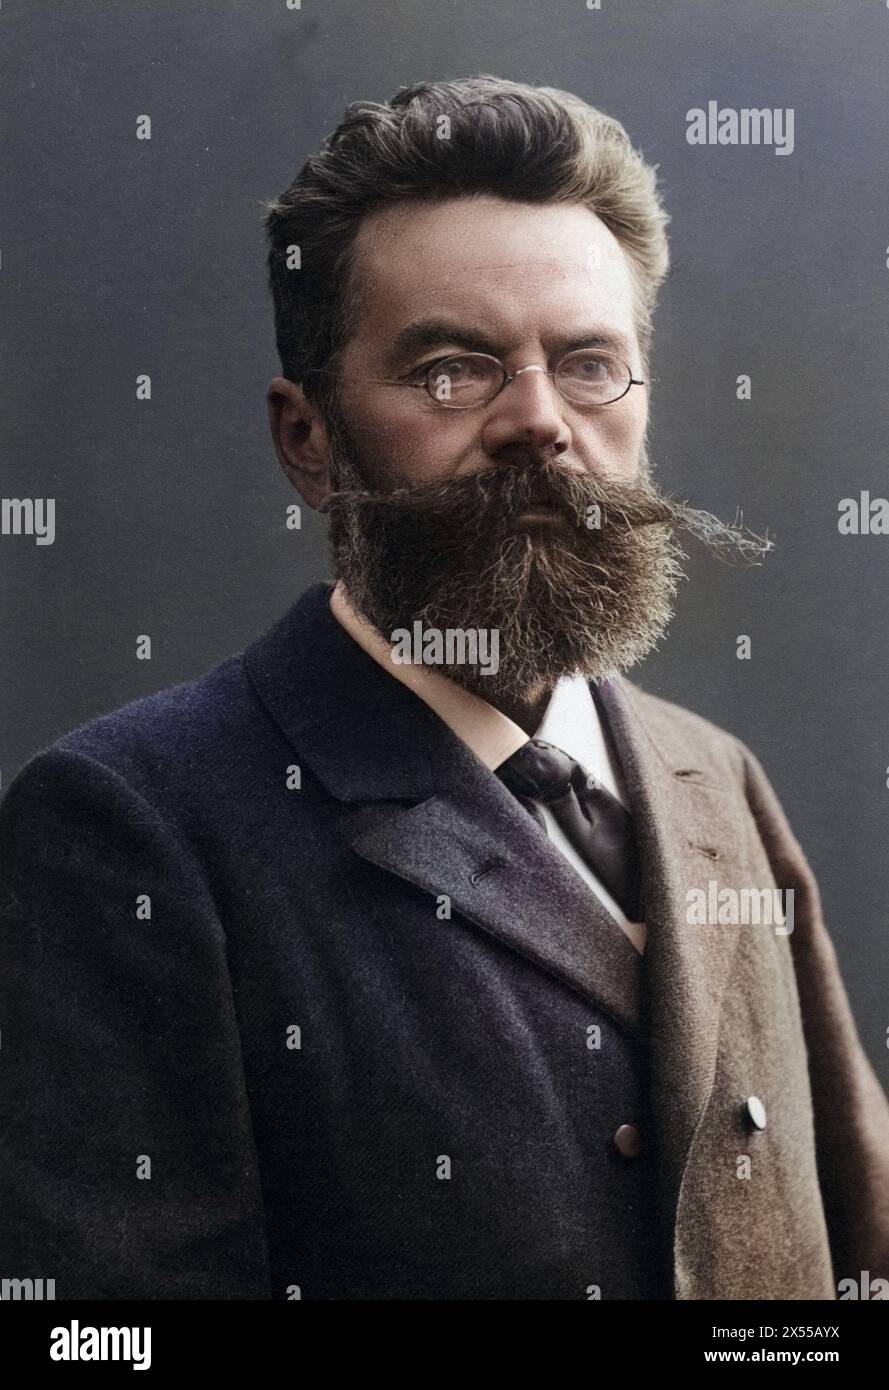 people, men, portrait / half length 1900s, old man with full beard, Eichstätt, circa 1900, ADDITIONAL-RIGHTS-CLEARANCE-INFO-NOT-AVAILABLE Stock Photo